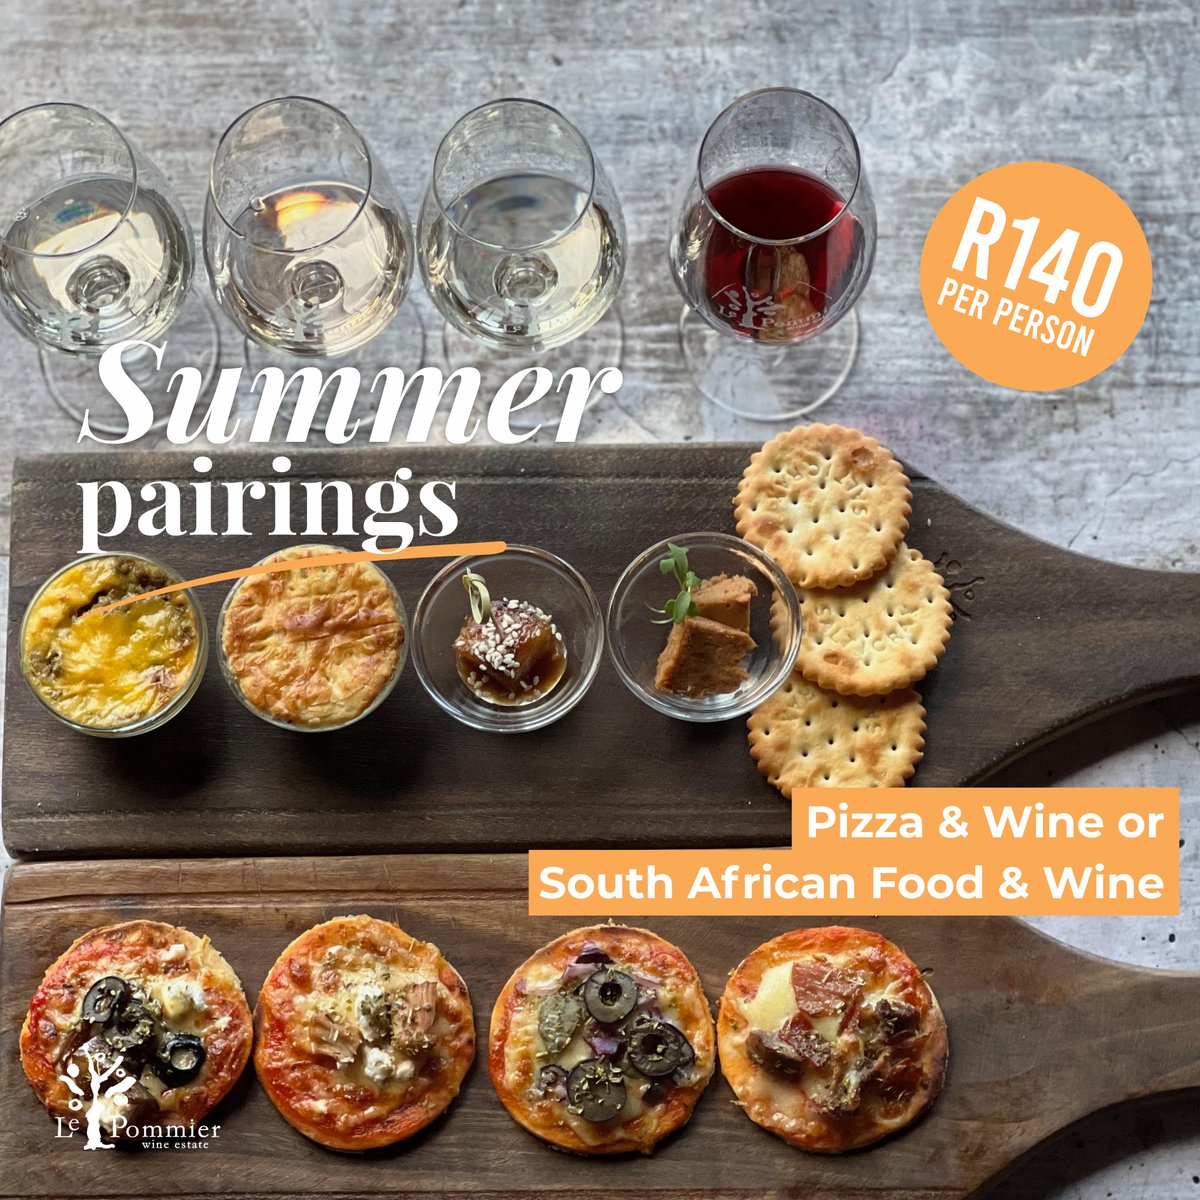 Book our Food & Wine Pairing - Pizza & Wine or South African Food & Wine for R140pp 021-8851269